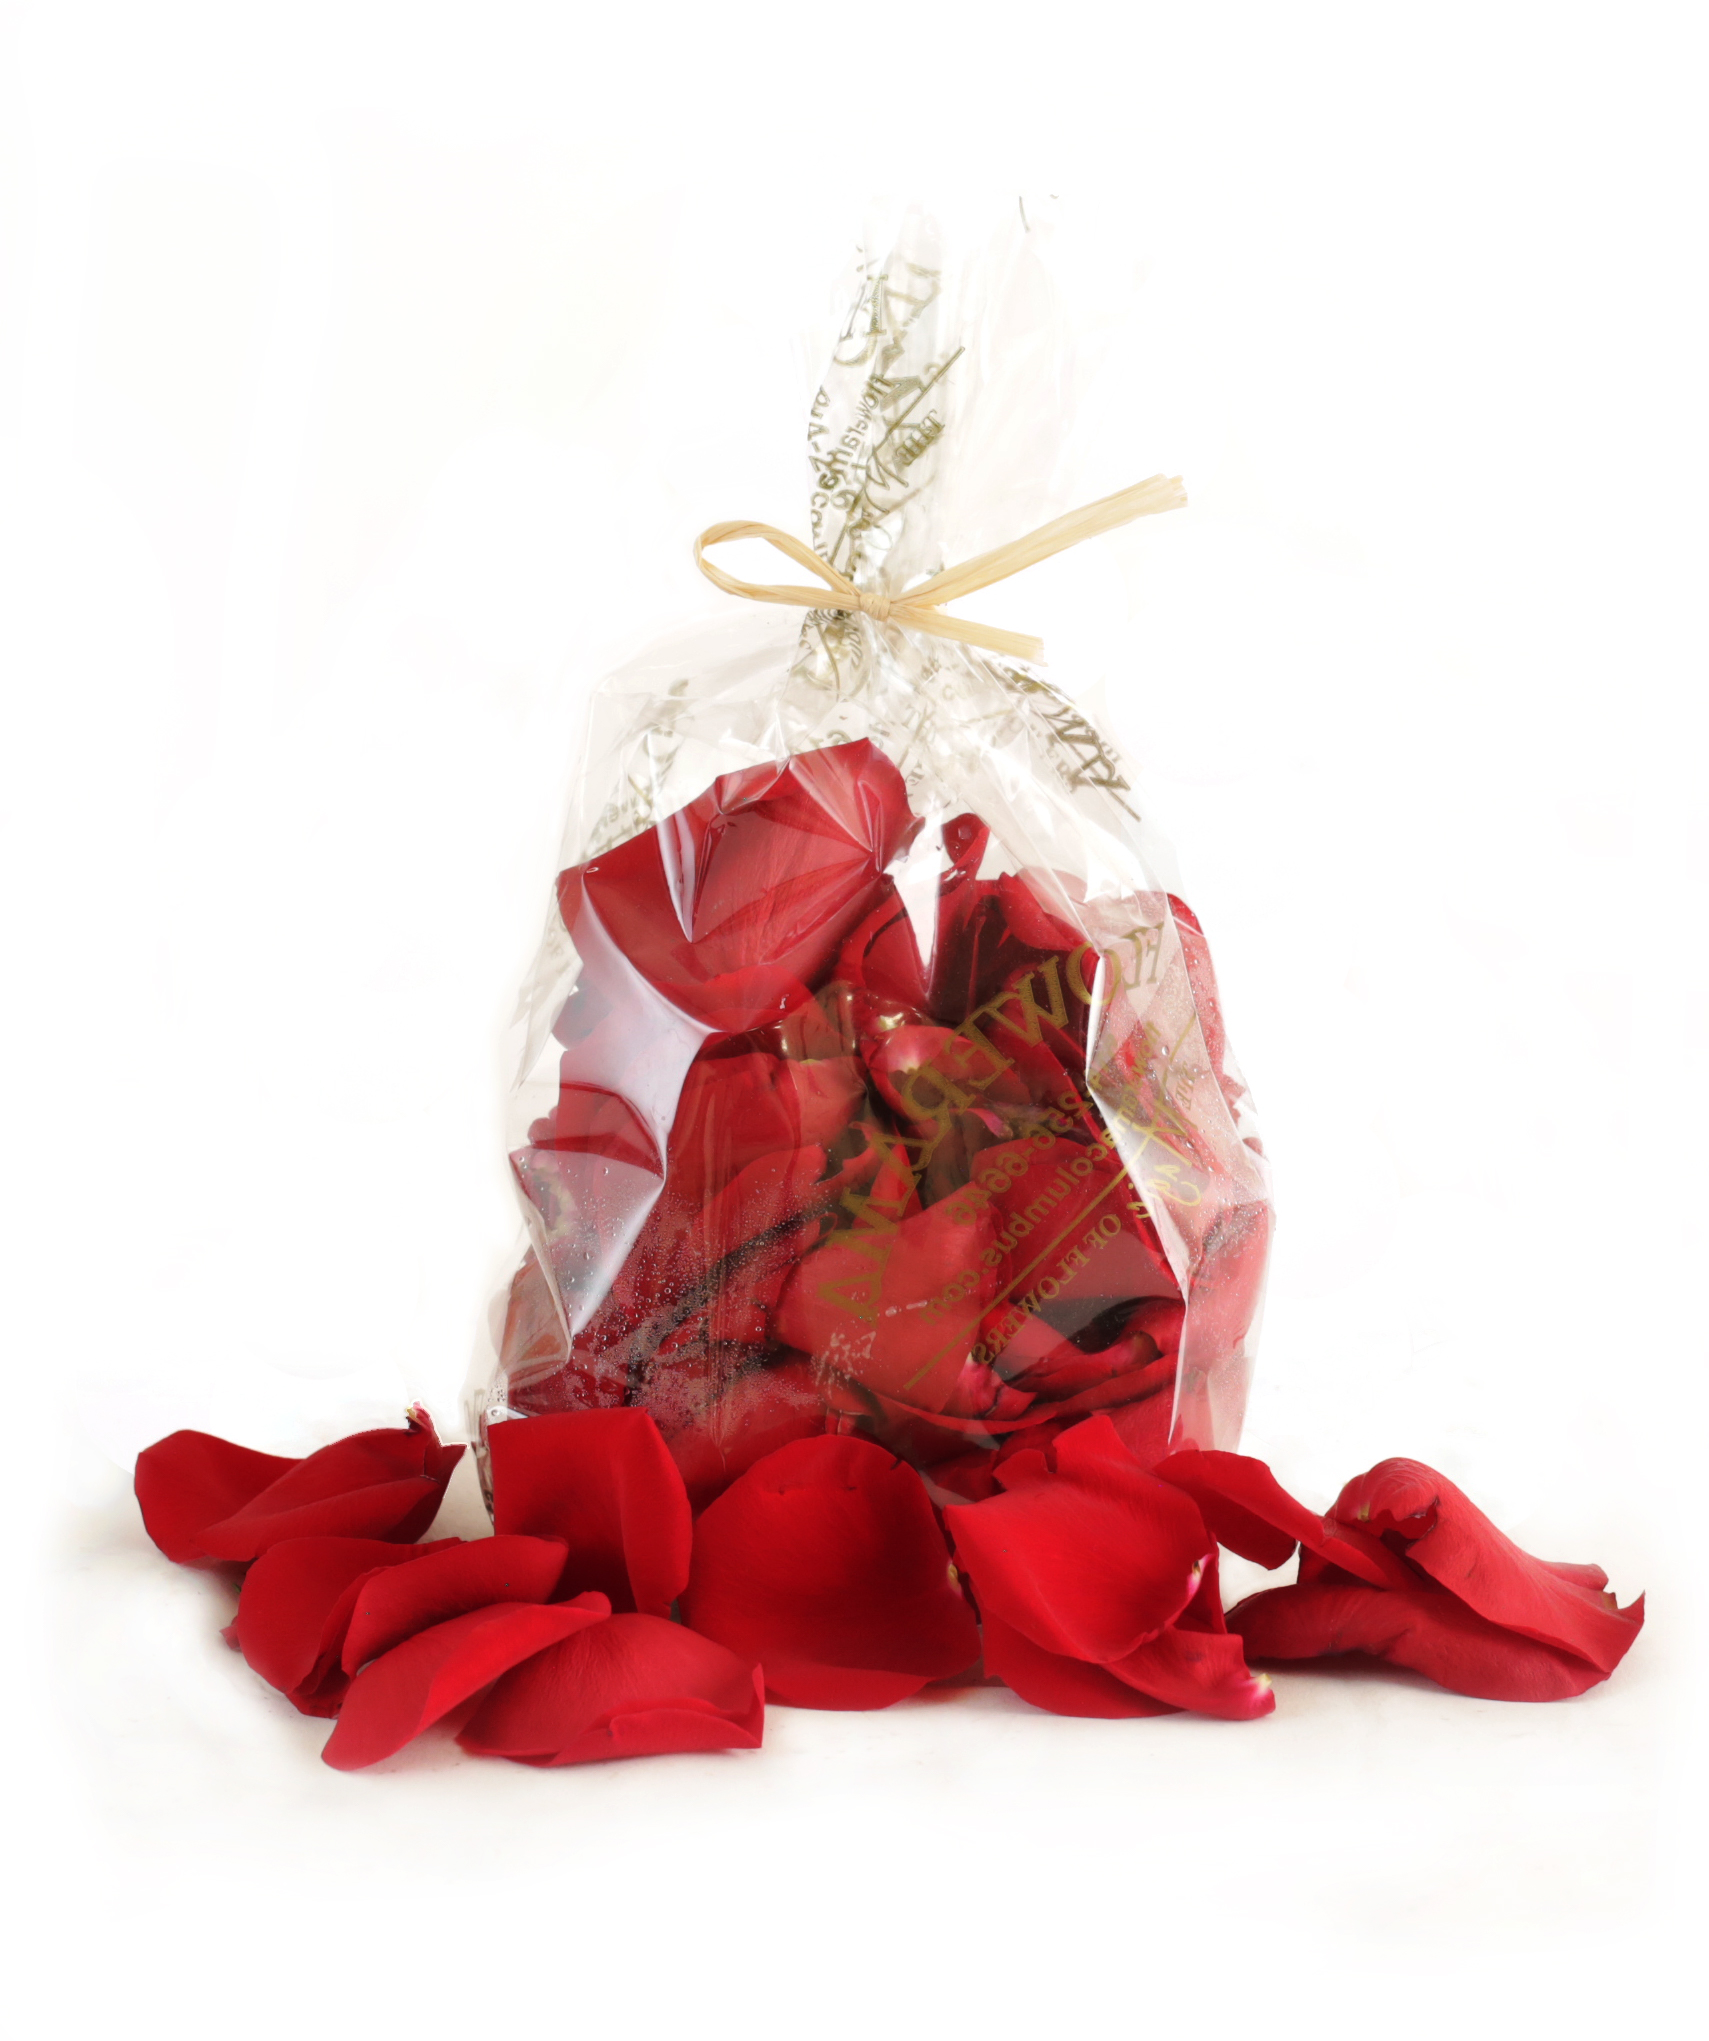 Bag of Picked Rose Petals Any Color Delivered in Baton Rouge, LA